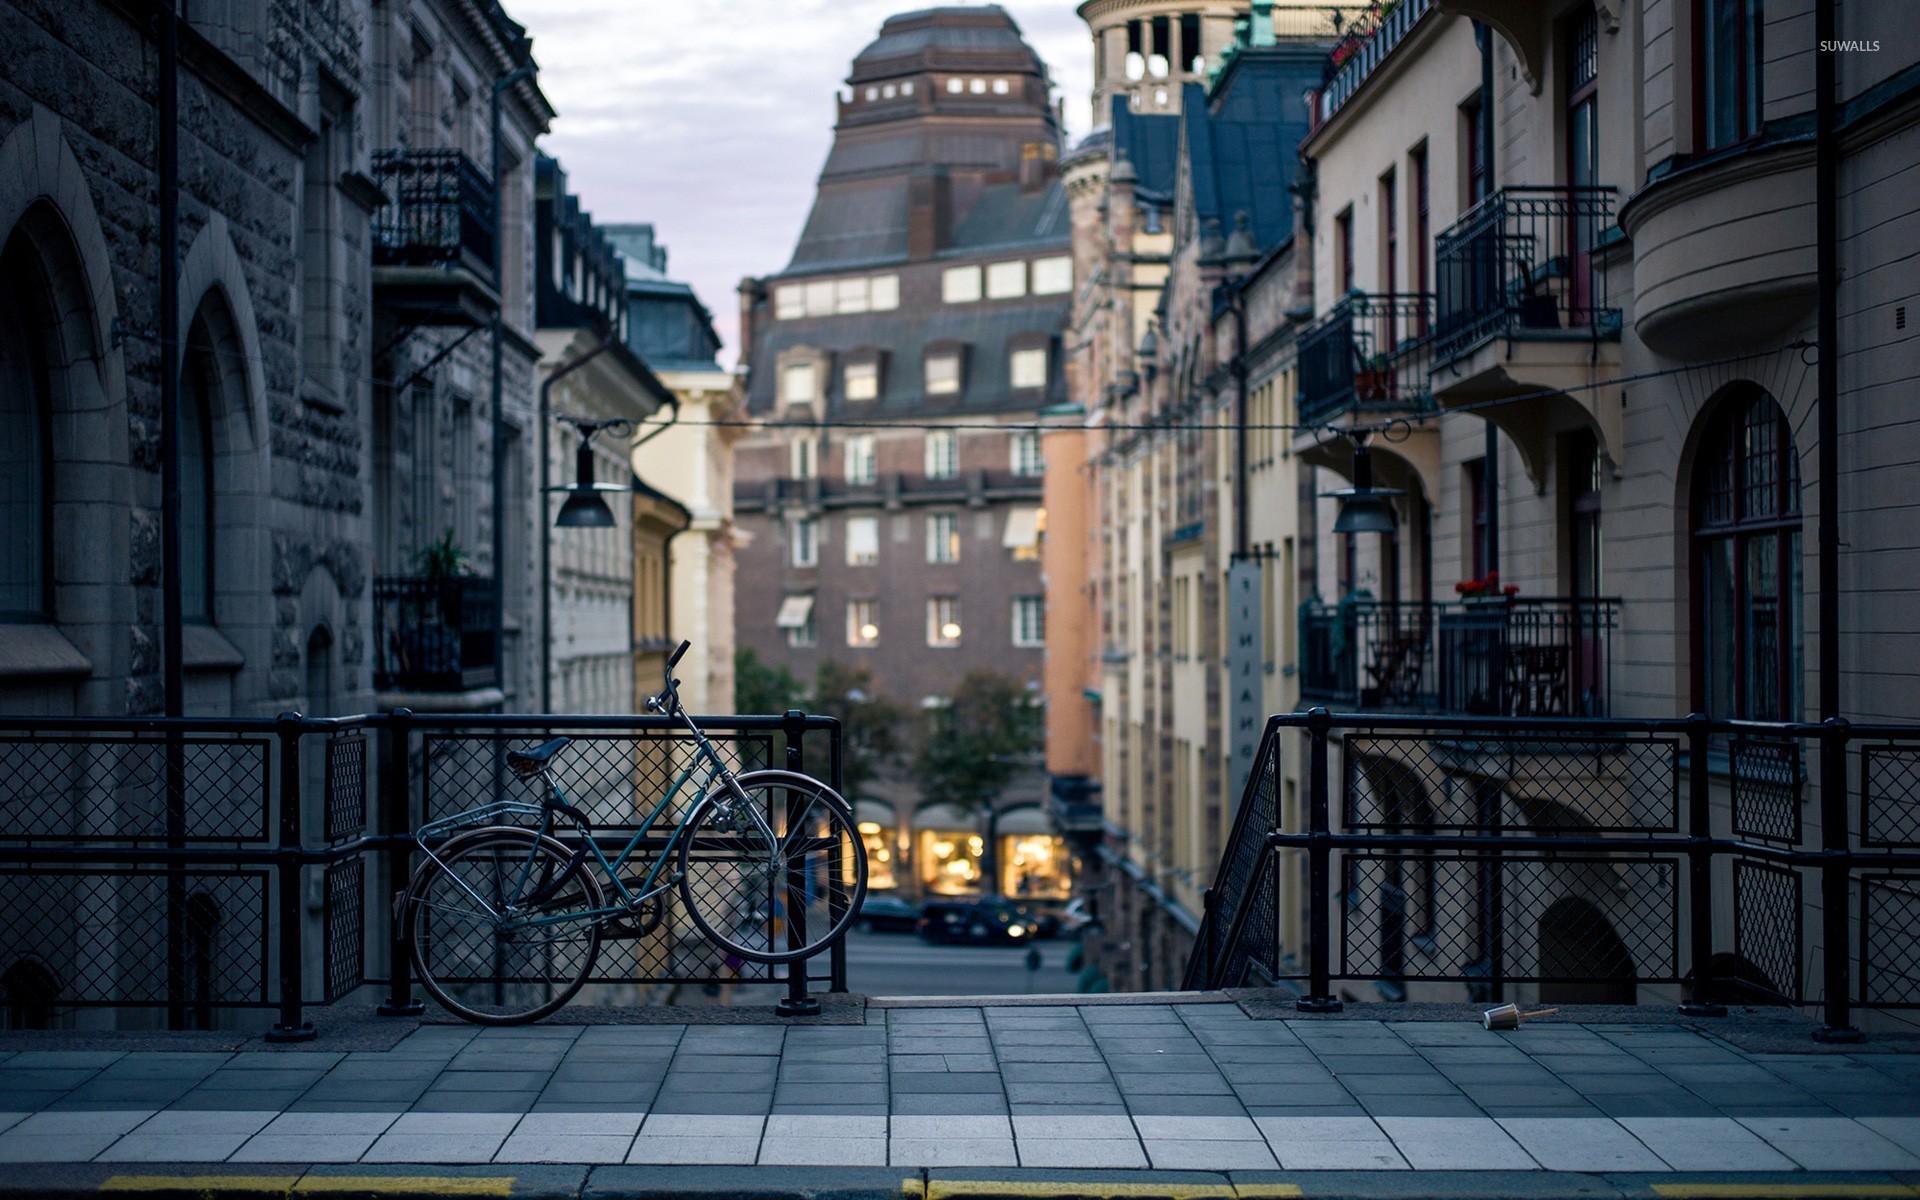 1920x1200 Bicycle on a street in Stockholm wallpaper